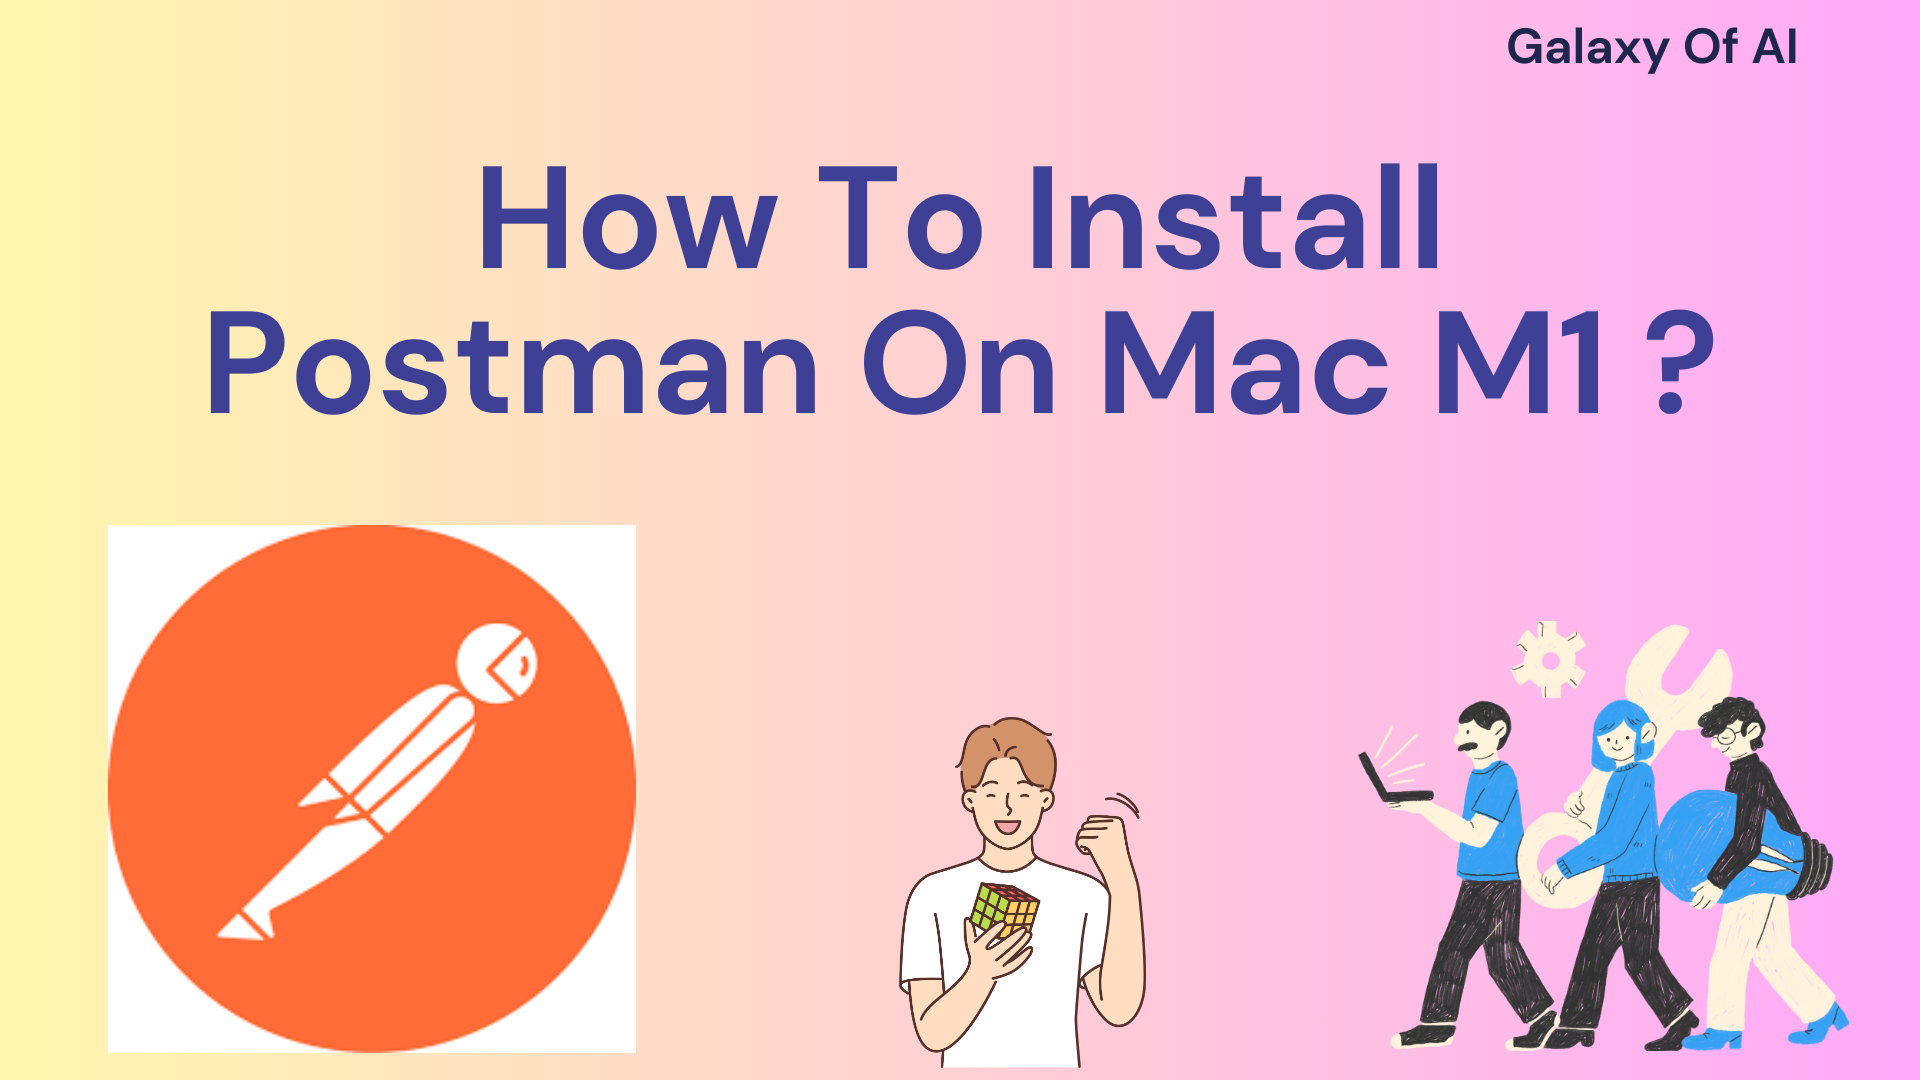 How To Install Postman On Mac M1 ?